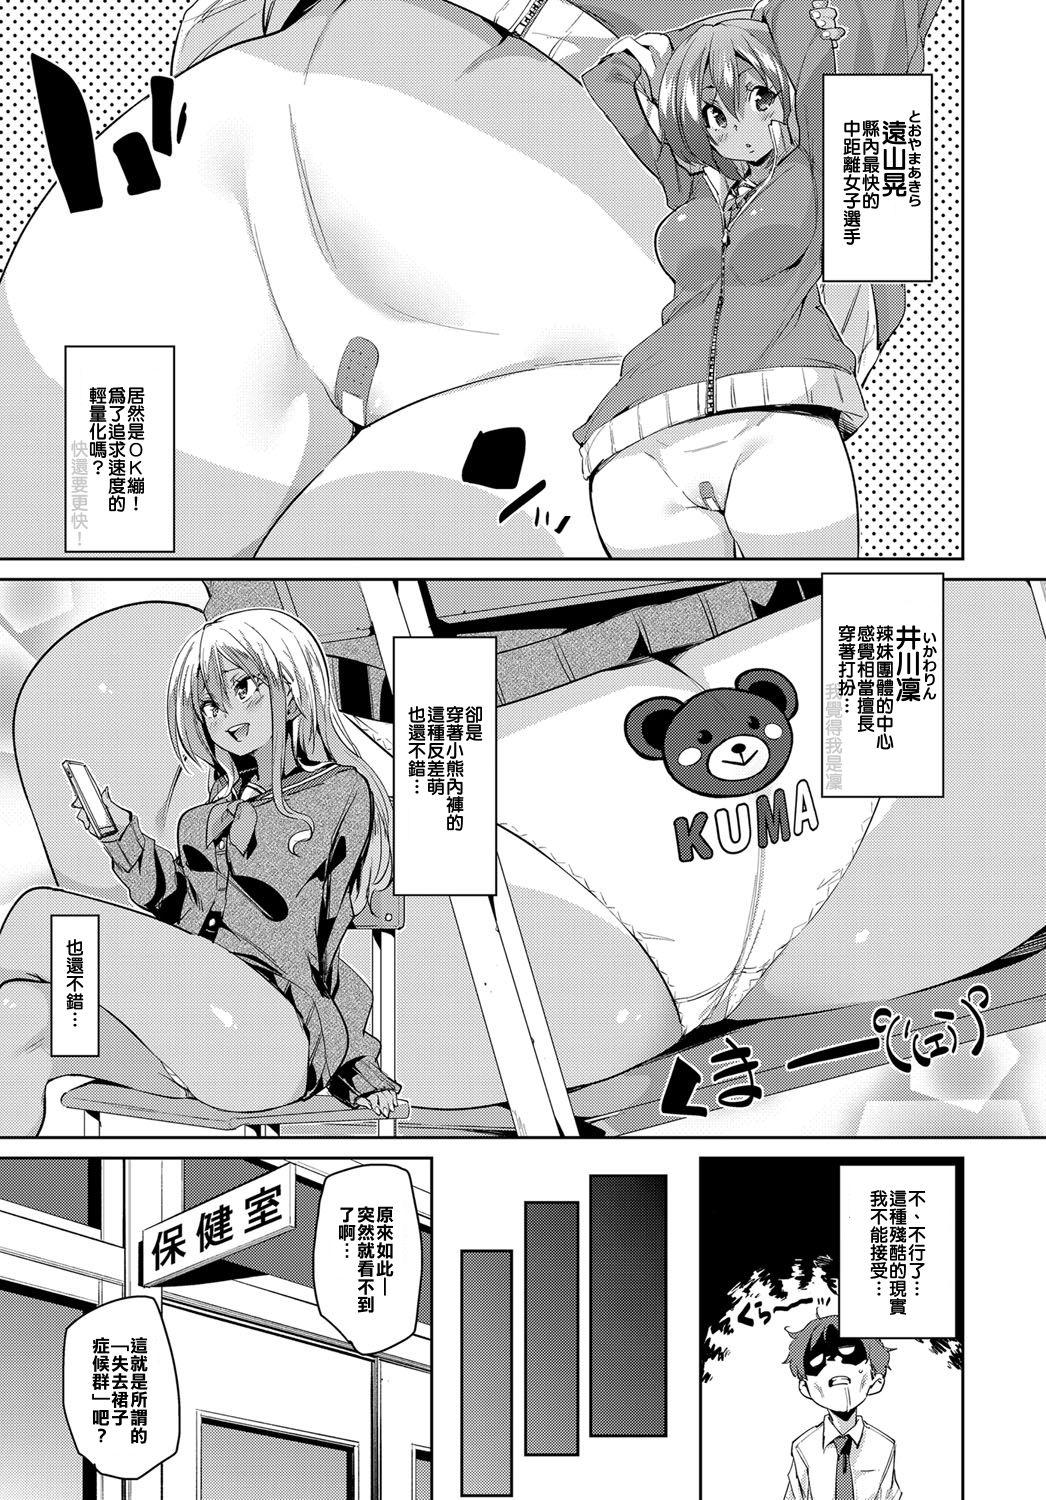 Tranny Porn Chiralism no Owari | Chiralism is End. Best Blowjob - Page 3